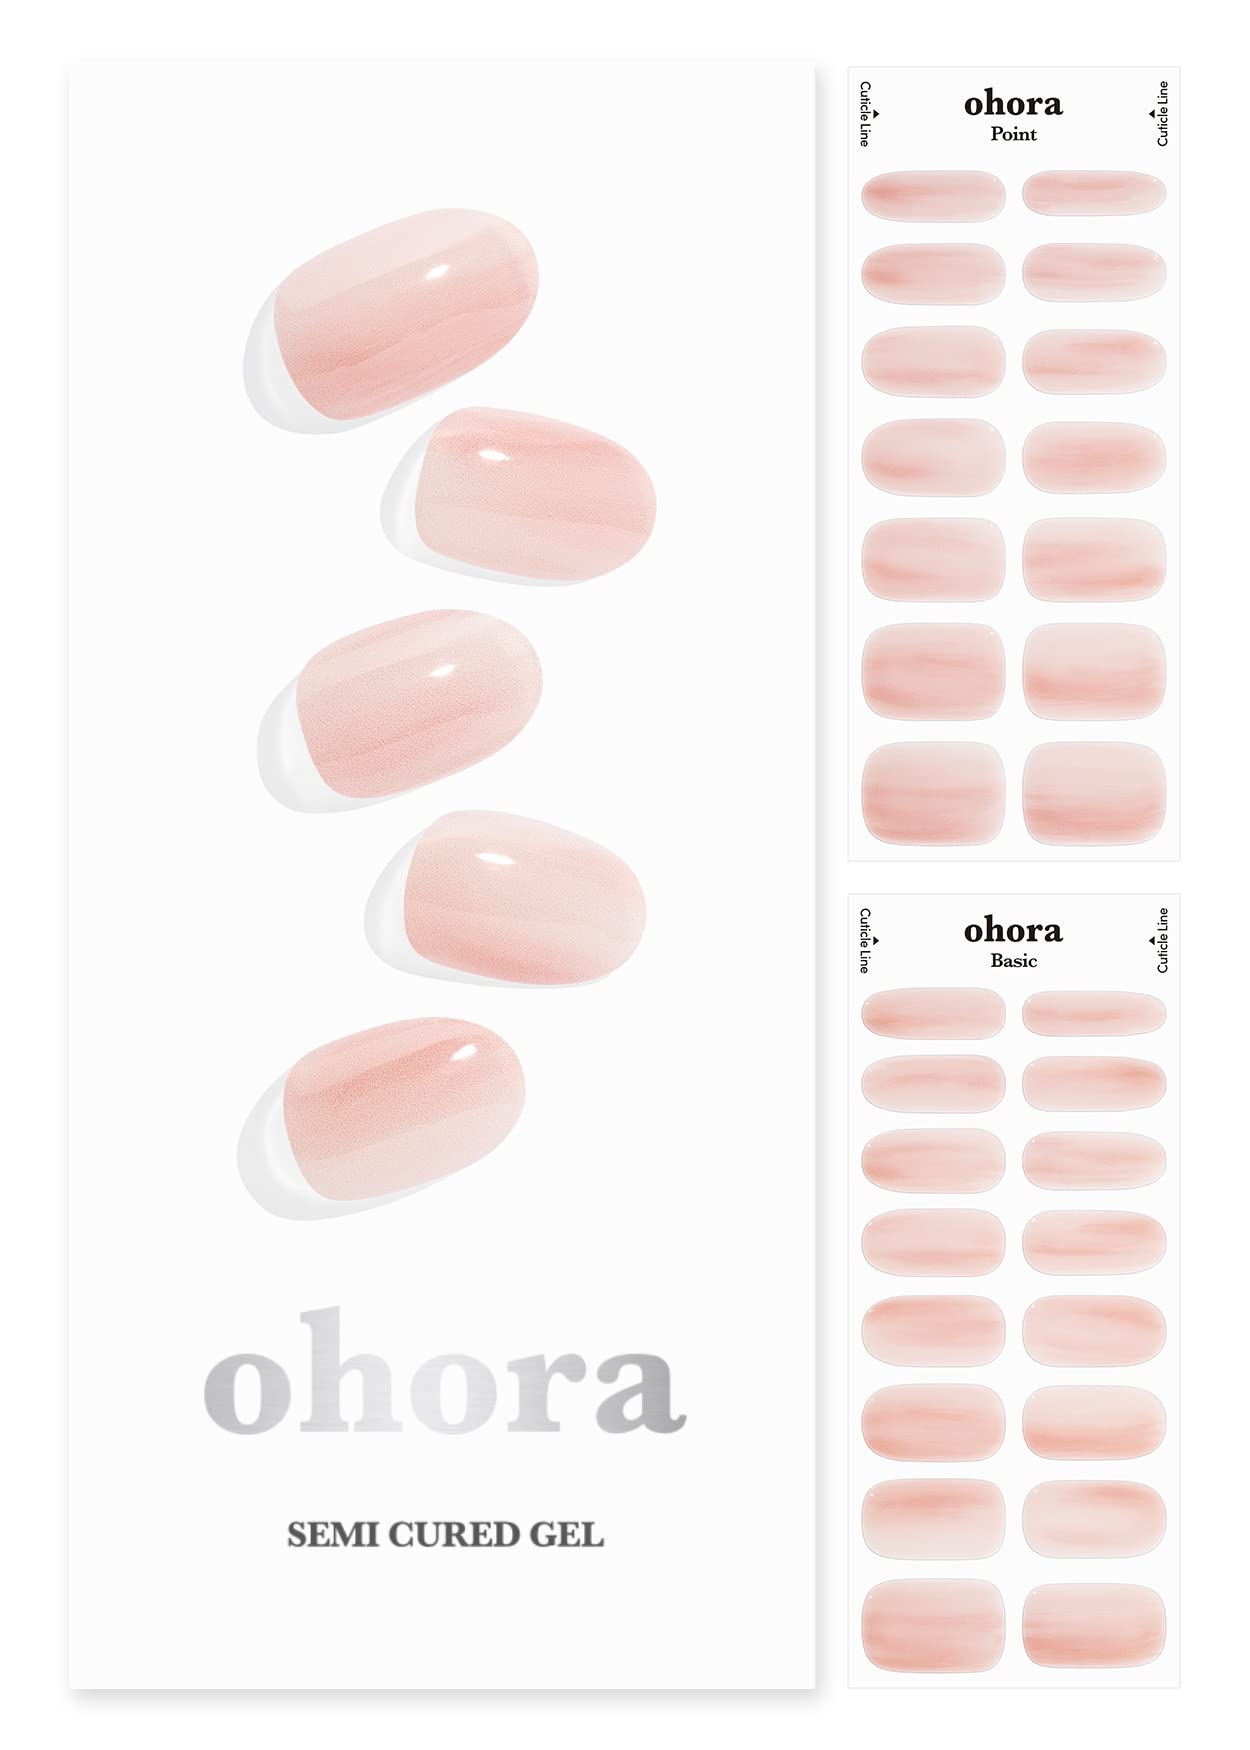 ohora Semi Cured Gel Nail Strips (N Apricot) - Works with Any Nail Lamps  Salon-Quality Long Lasting Easy to Apply & Remove - Includes 2 Prep Pads  Nail File & Wooden Stick